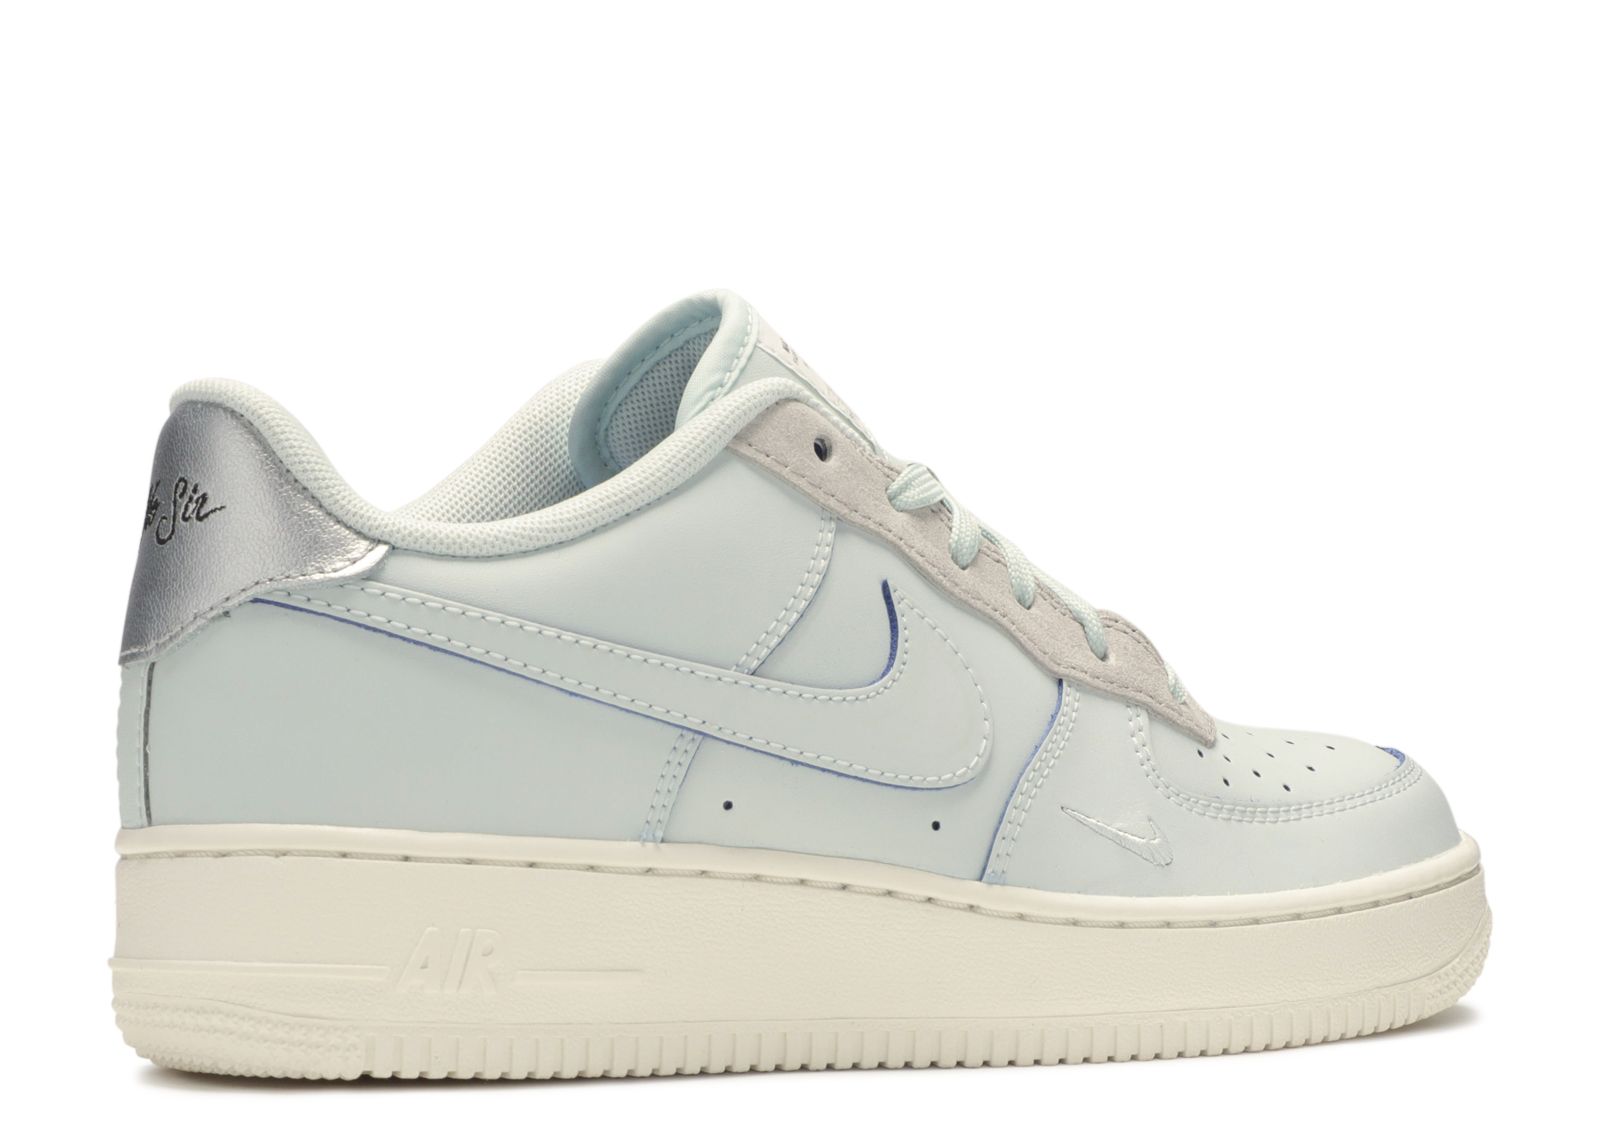 Nike Air Force 1 Low LV8 x Devin Booker Moss Point 2019 - CJ9716-001 for  Sale, Authenticity Guaranteed